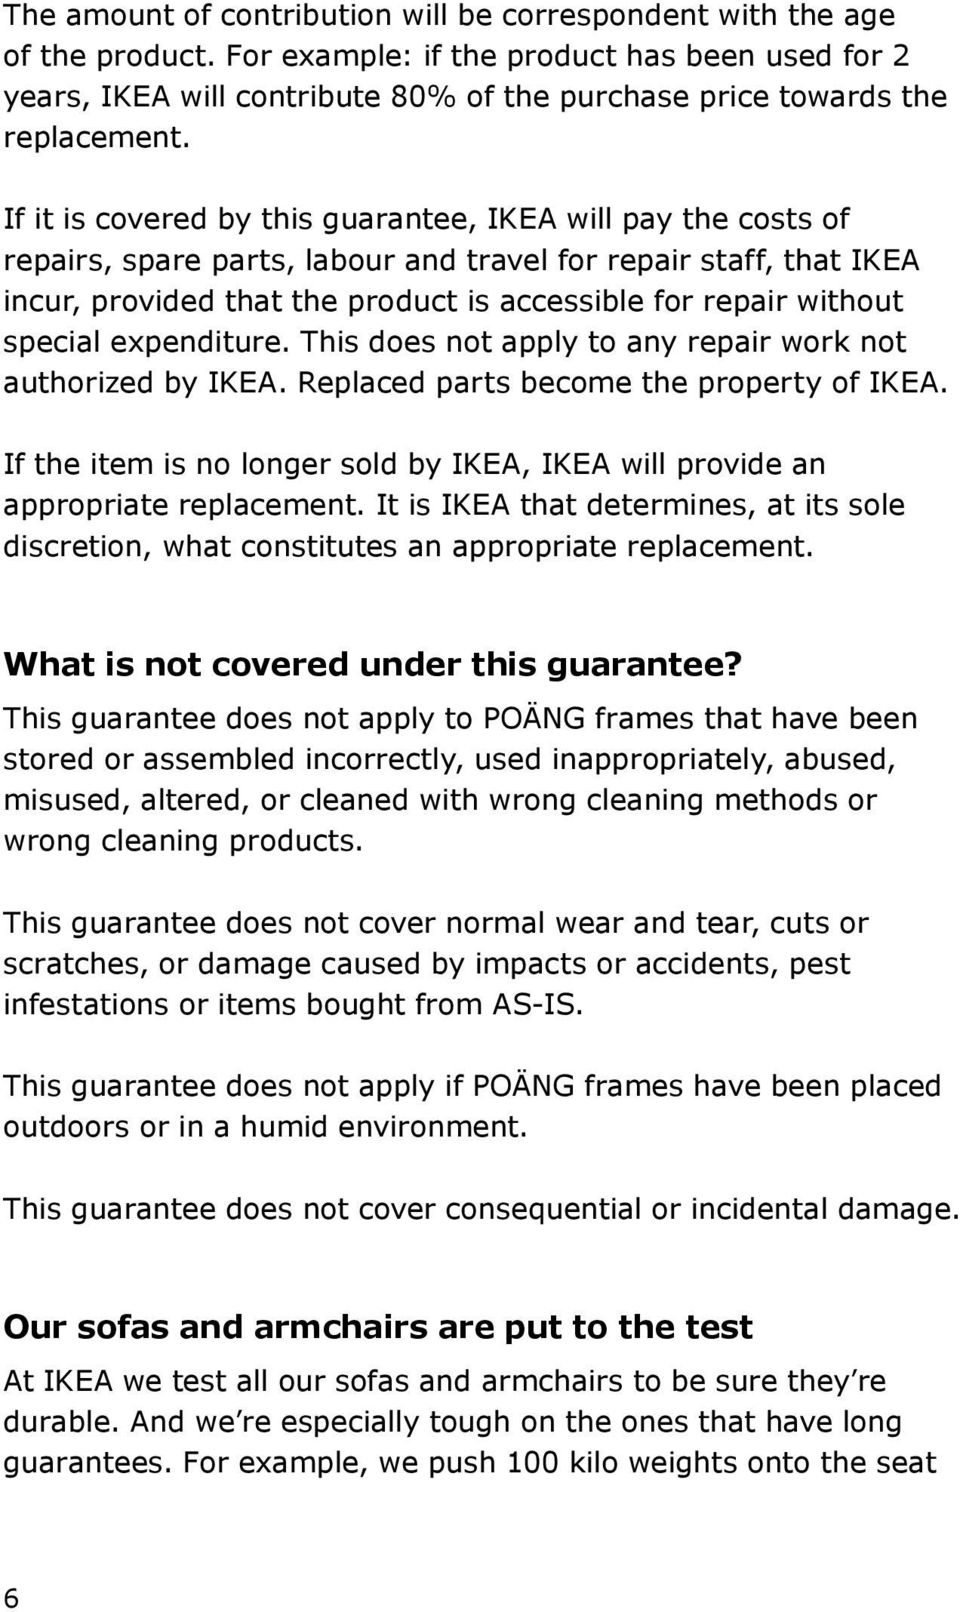 If it is covered by this guarantee, IKEA will pay the costs of repairs, spare parts, labour and travel for repair staff, that IKEA incur, provided that the product is accessible for repair without